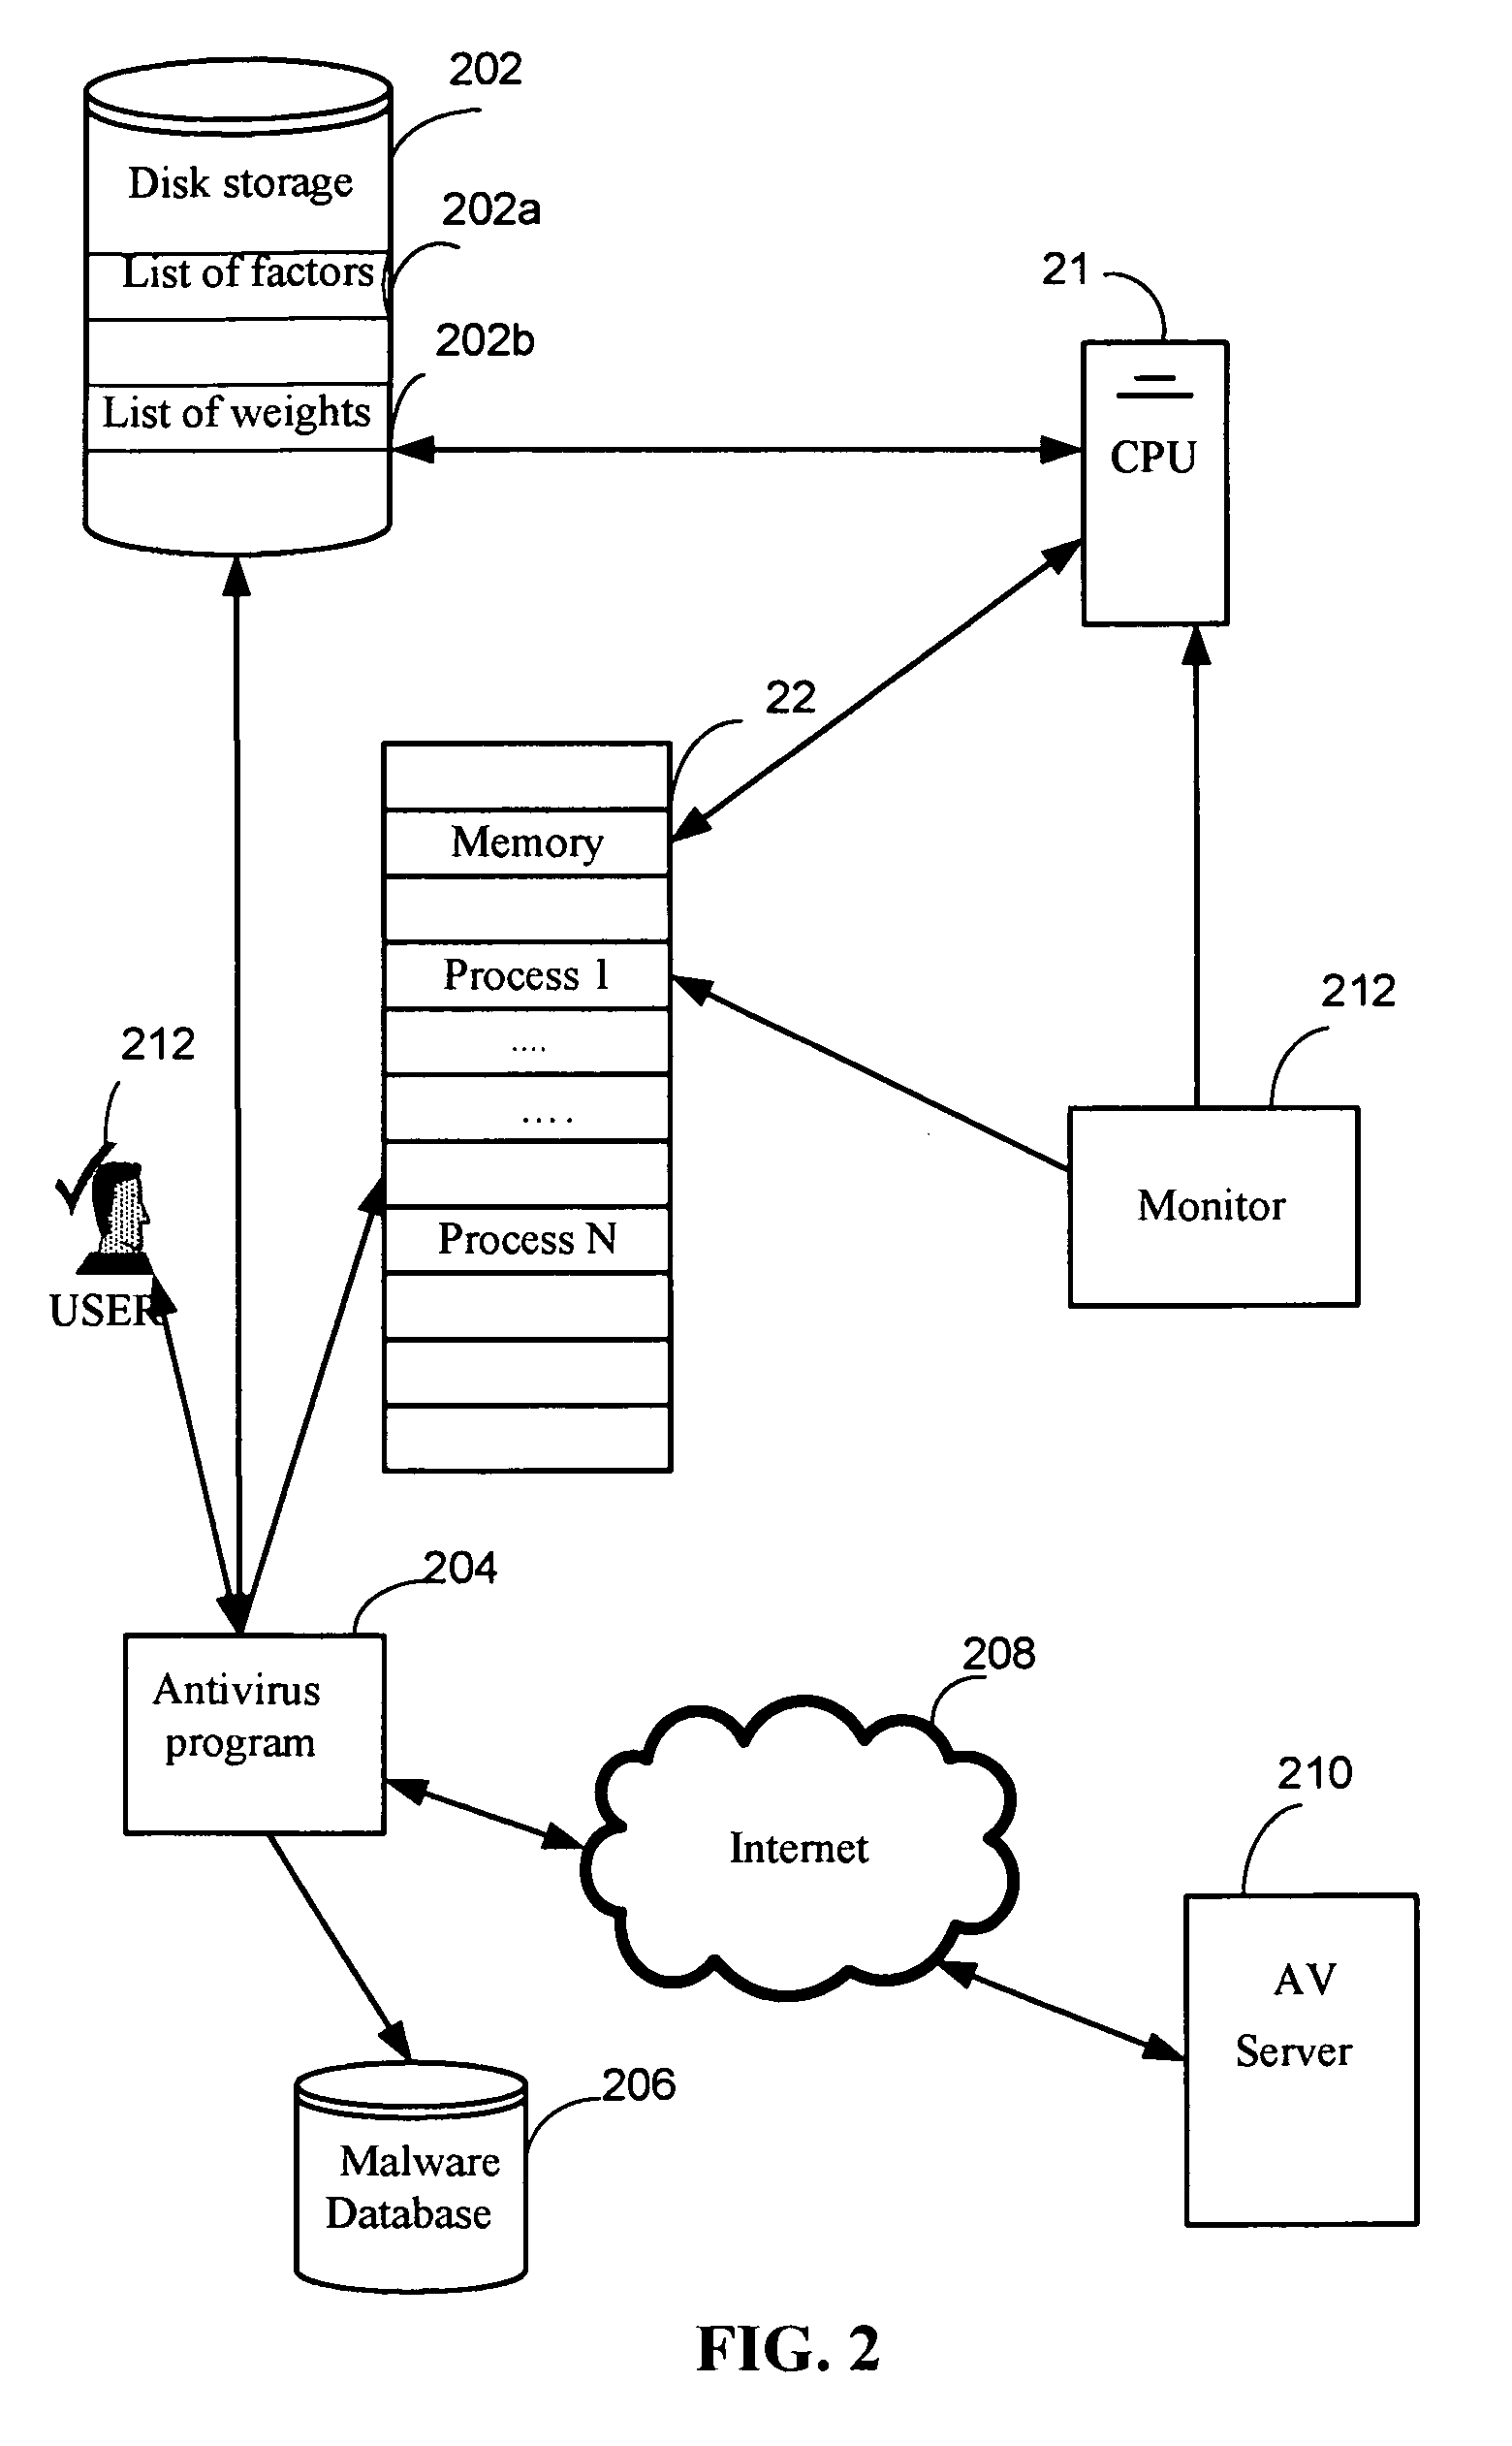 System and method for security rating of computer processes